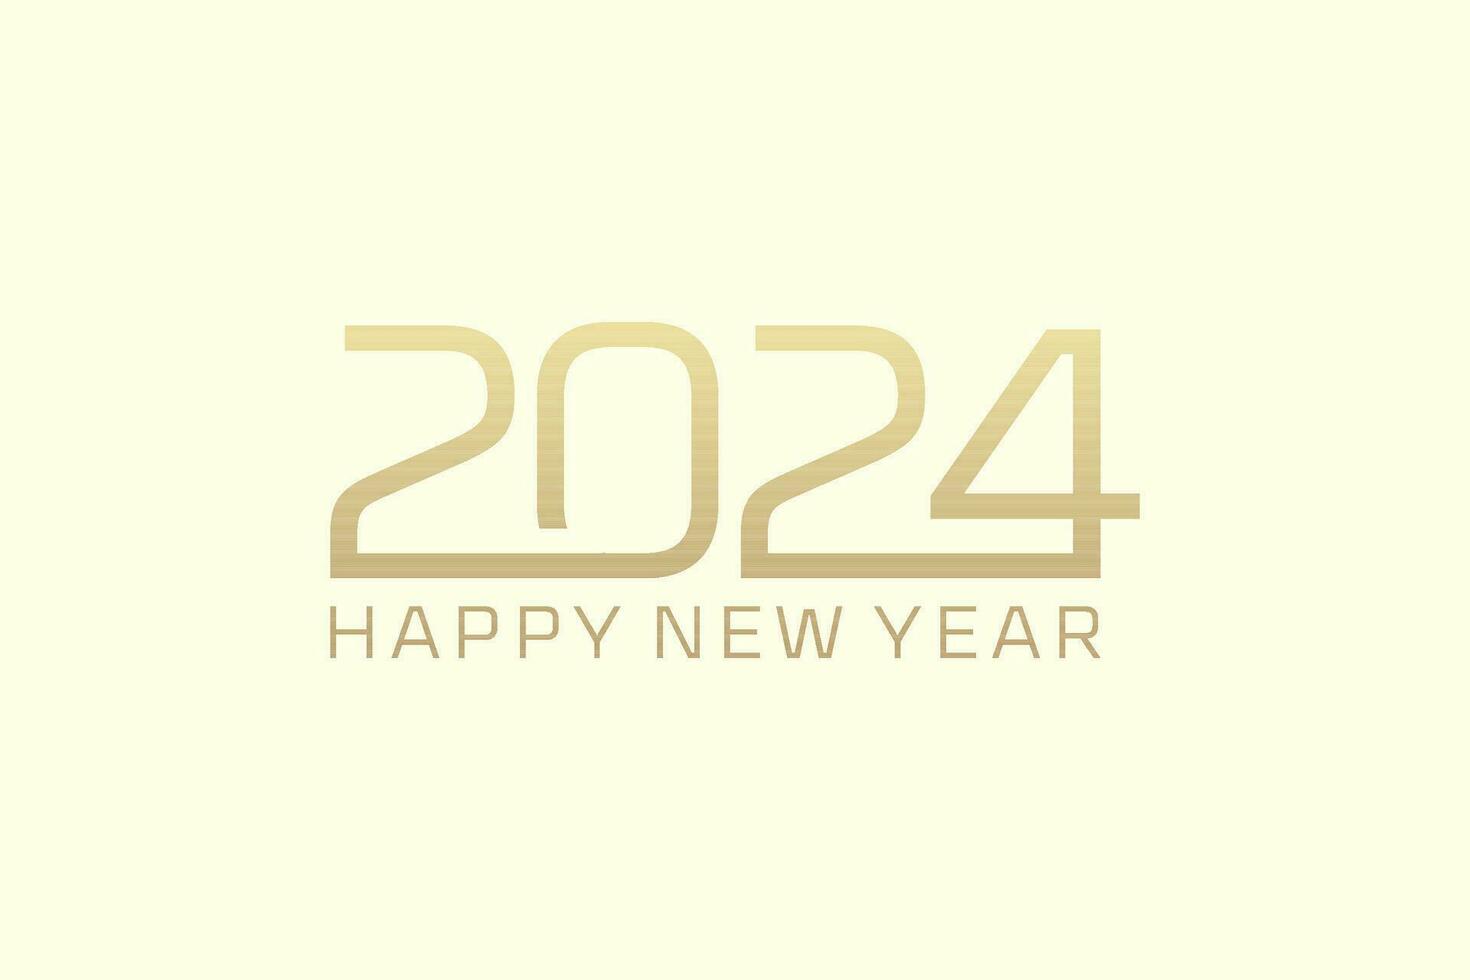 2024 typography logo design concept. Happy new year 2024 logo design with golden color vector